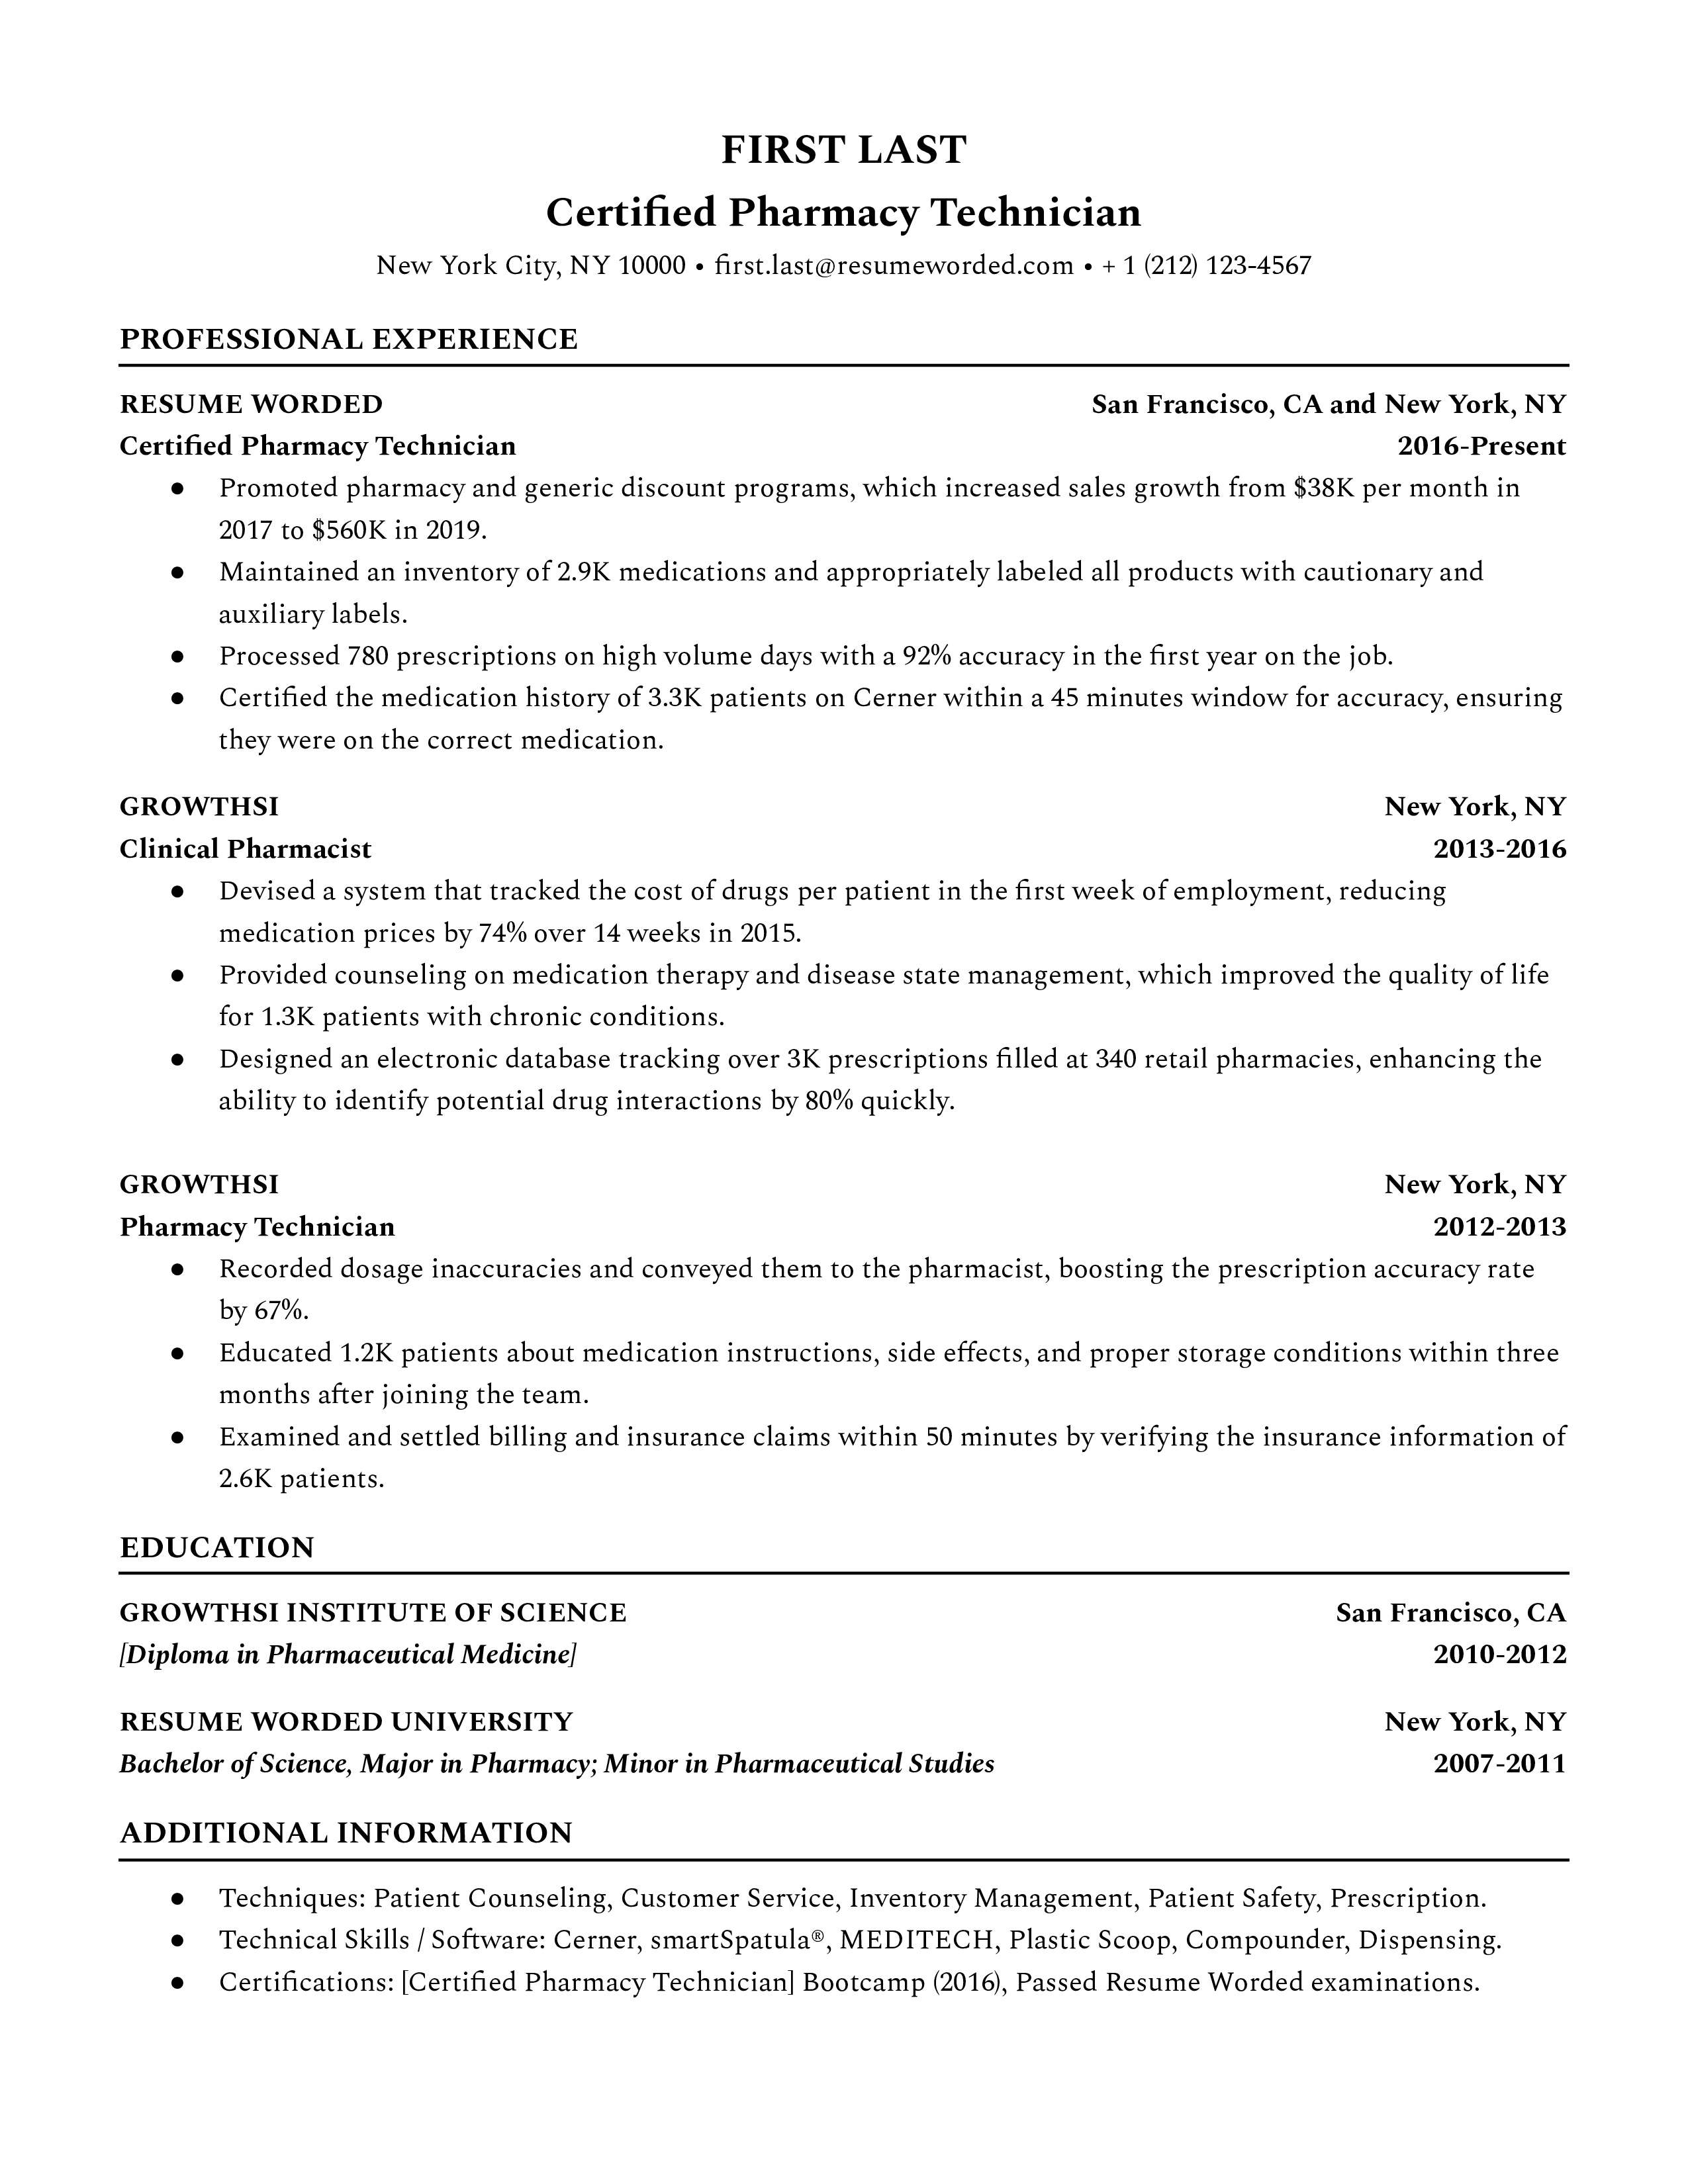 A CV for a Certified Pharmacy Technician highlighting digital skills and specific pharmaceutical knowledge.